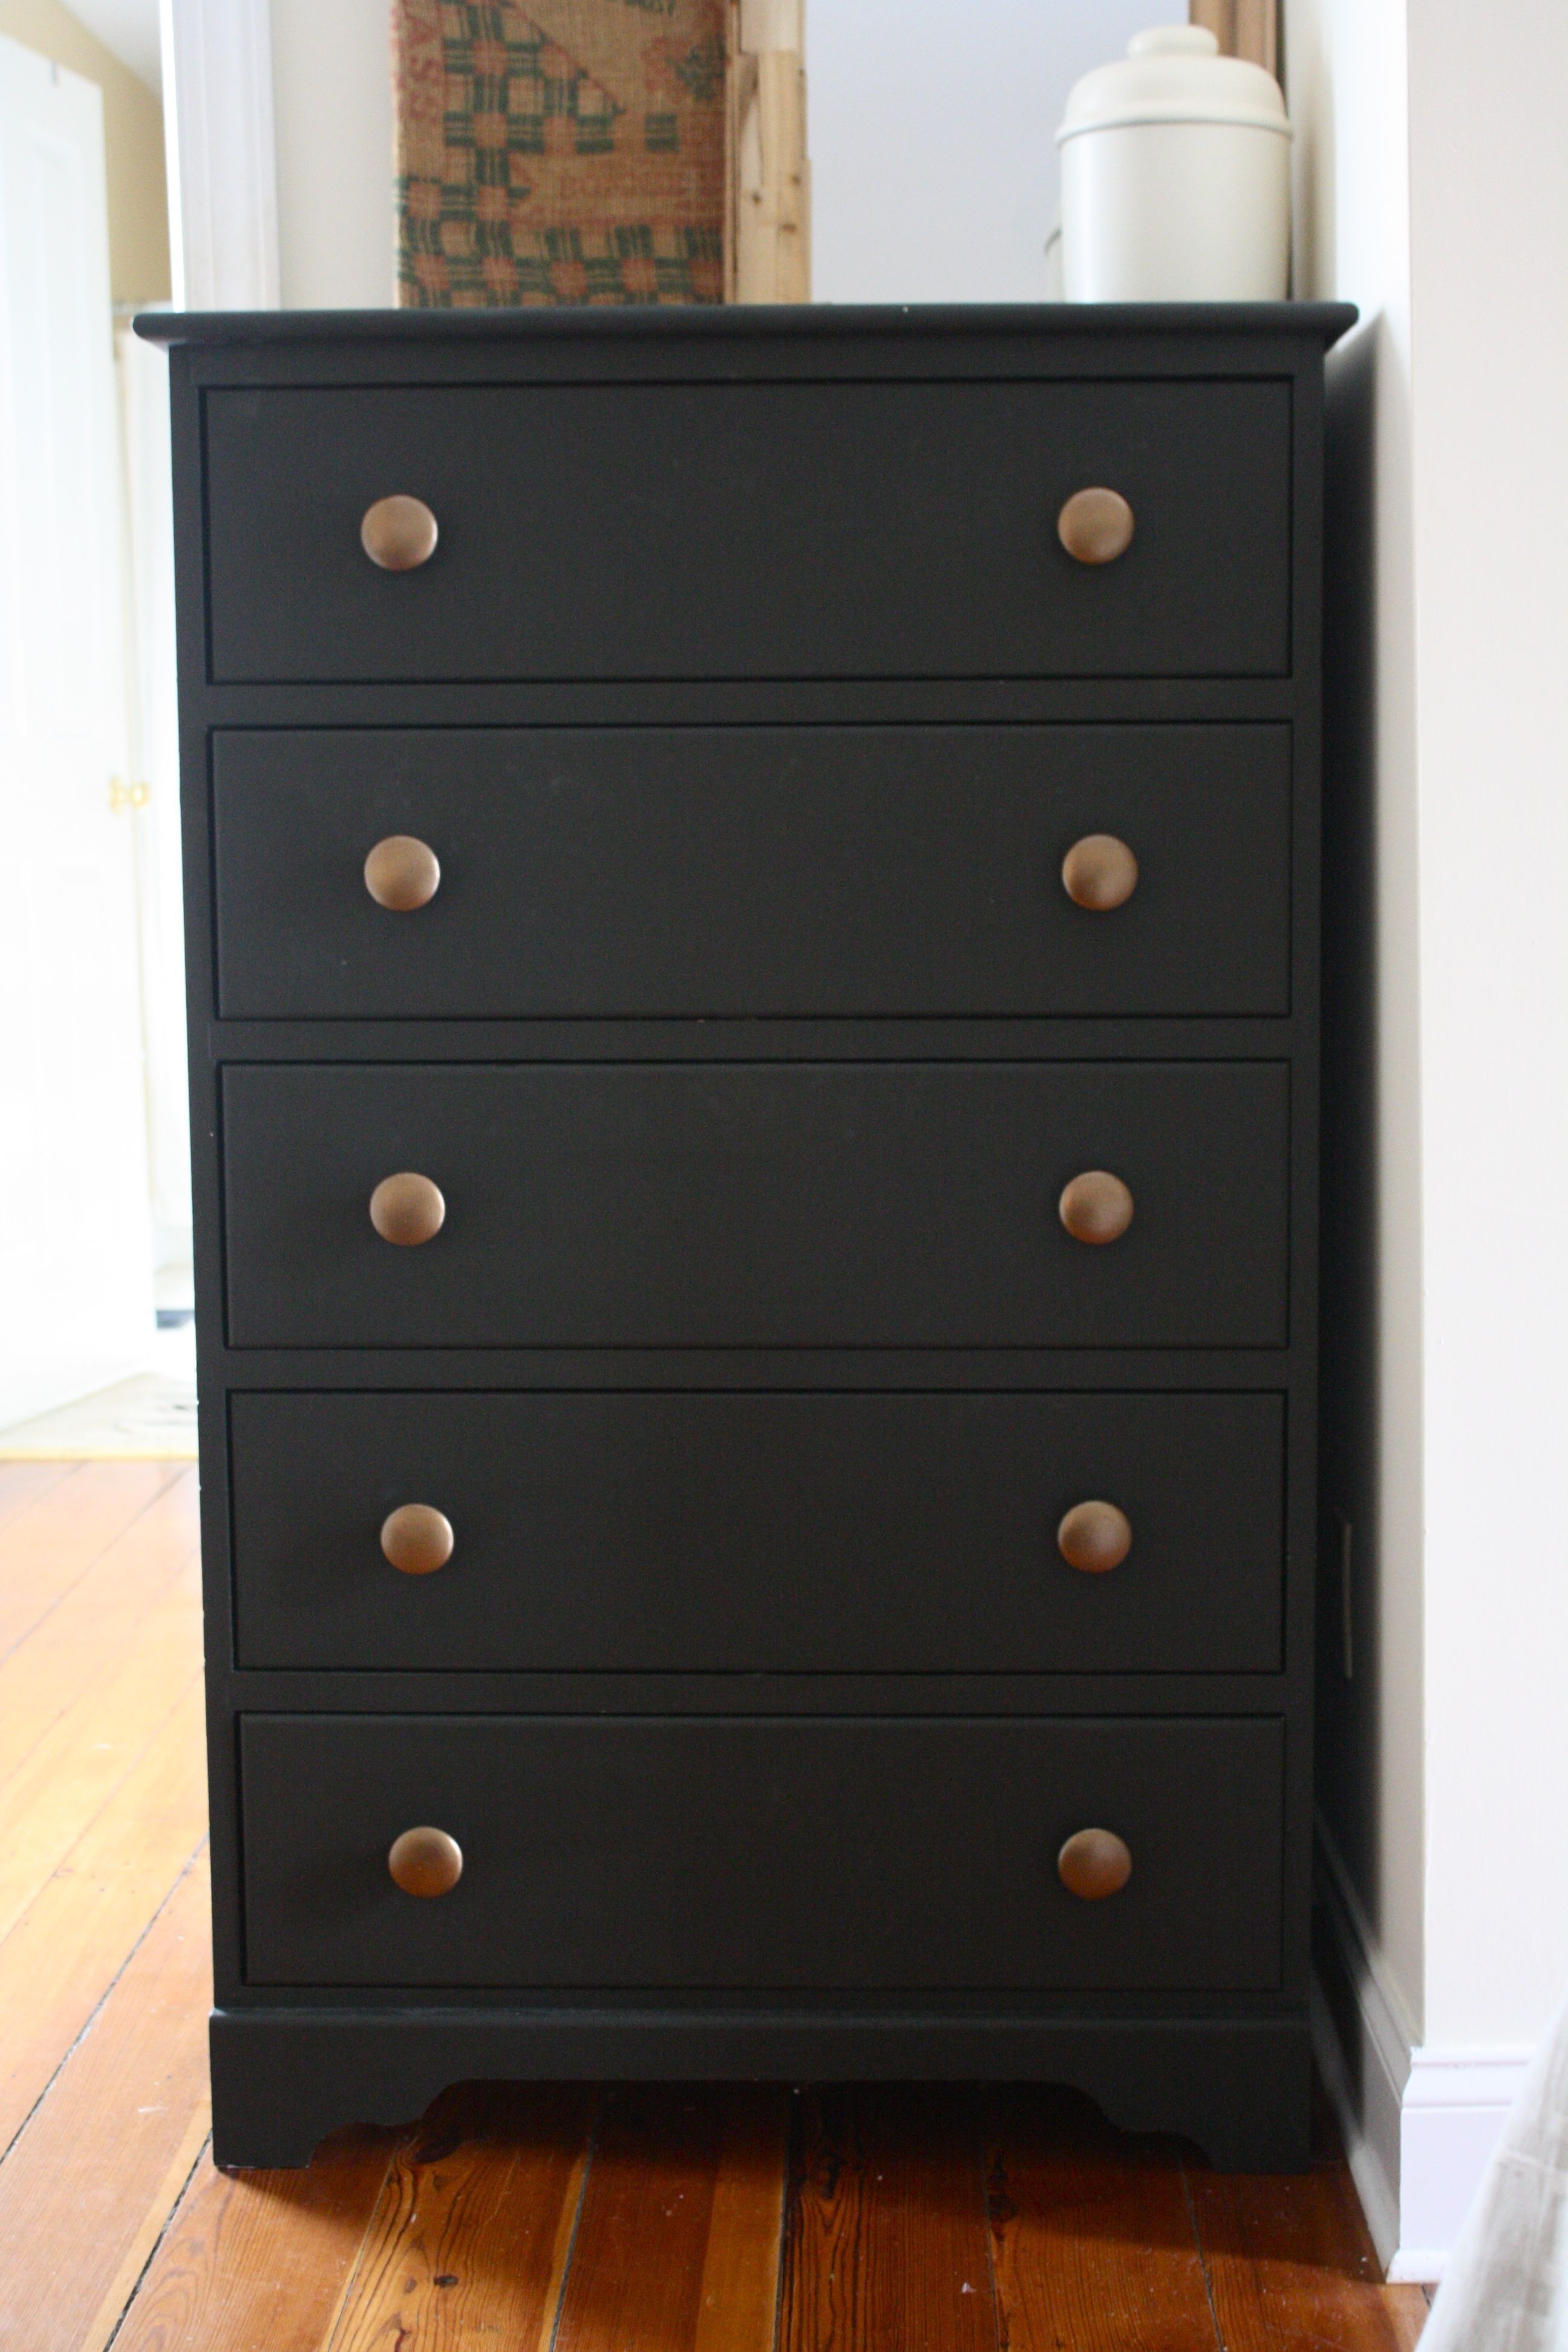 Matte Black Painted Dresser Using Flat Black Paint | Home Decor Within Most Popular Satin Black &amp; Painted White Sideboards (View 2 of 20)